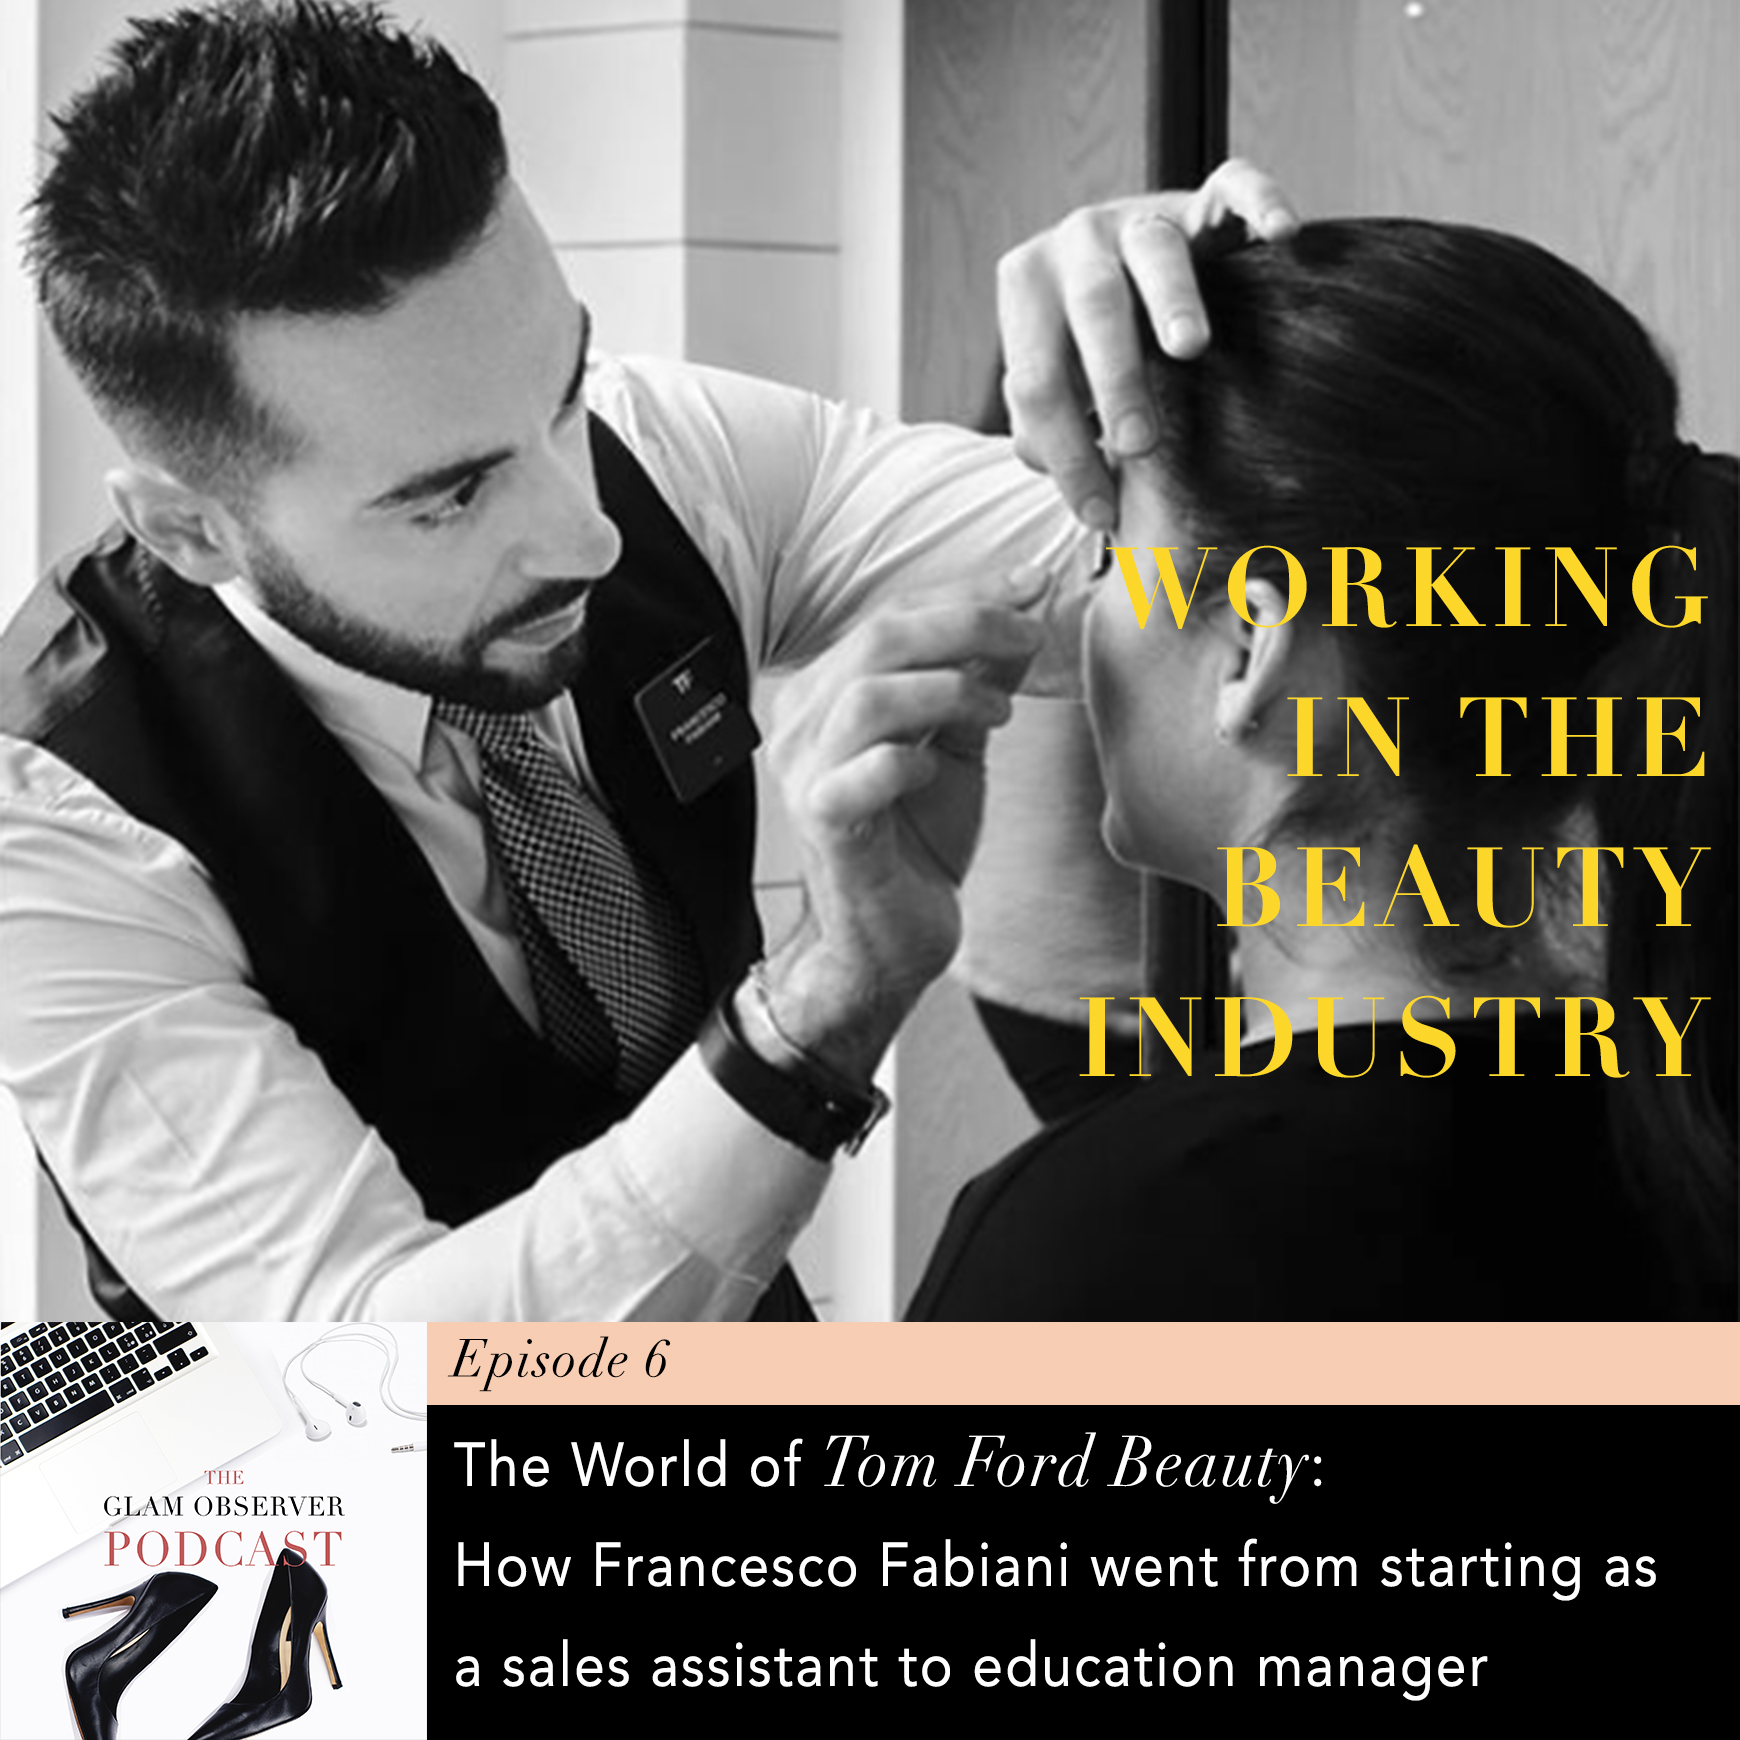 Discover The World Of Tom Ford Beauty With Francesco Fabiani - GLAM OBSERVER